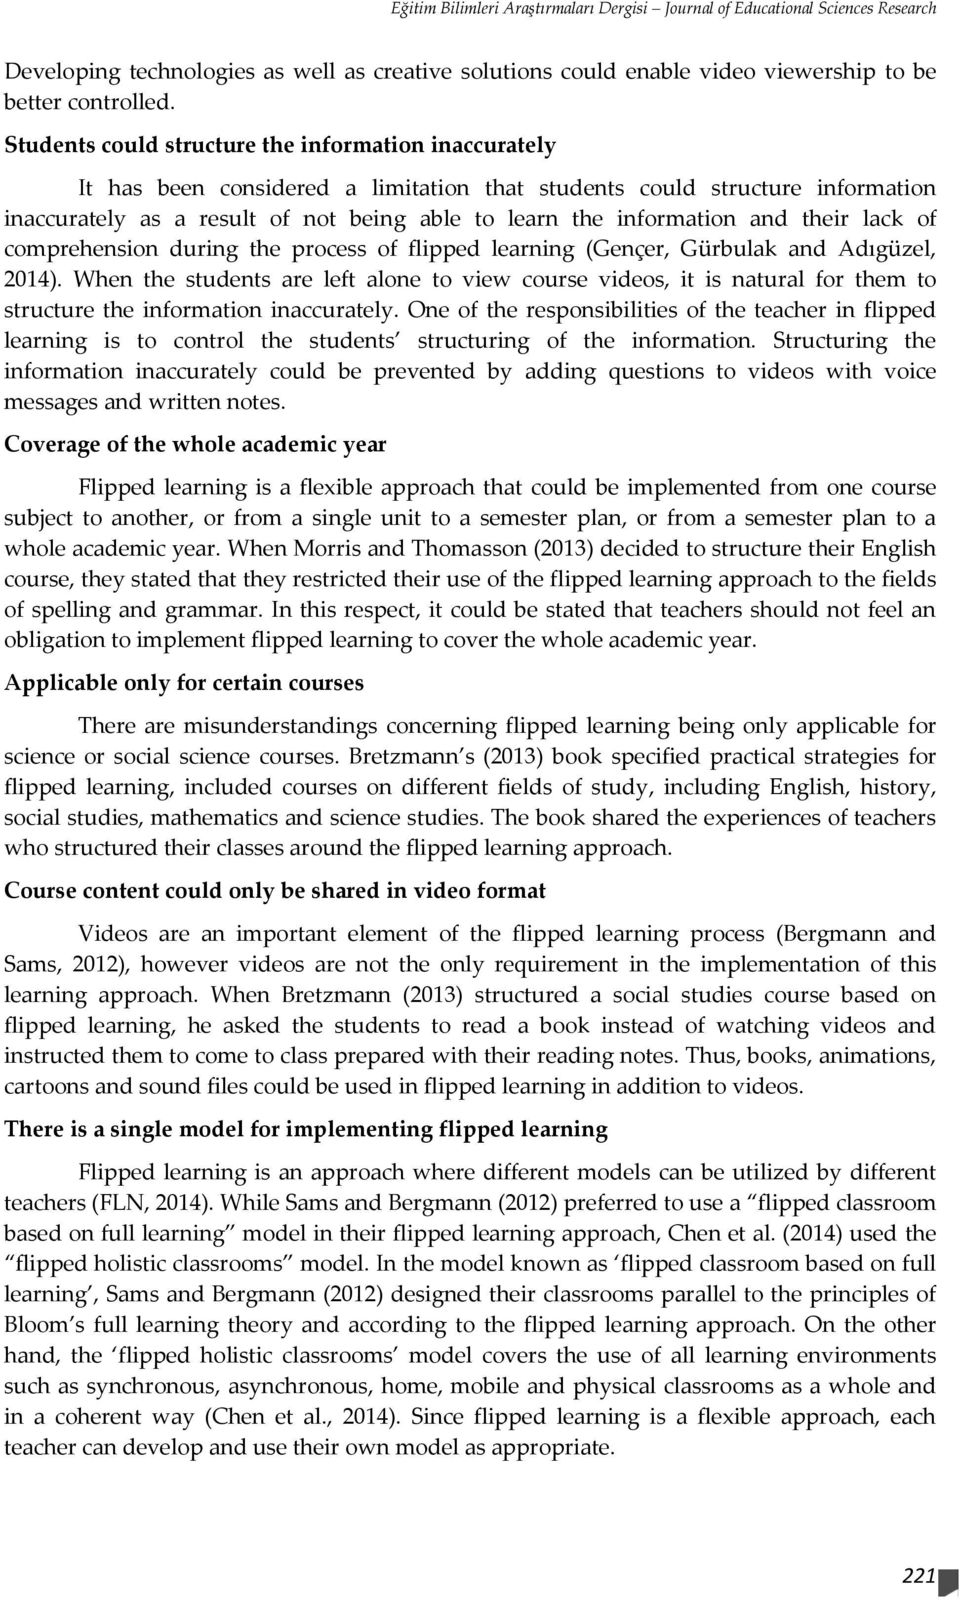 and their lack of comprehension during the process of flipped learning (Gençer, Gürbulak and Adıgüzel, 2014).